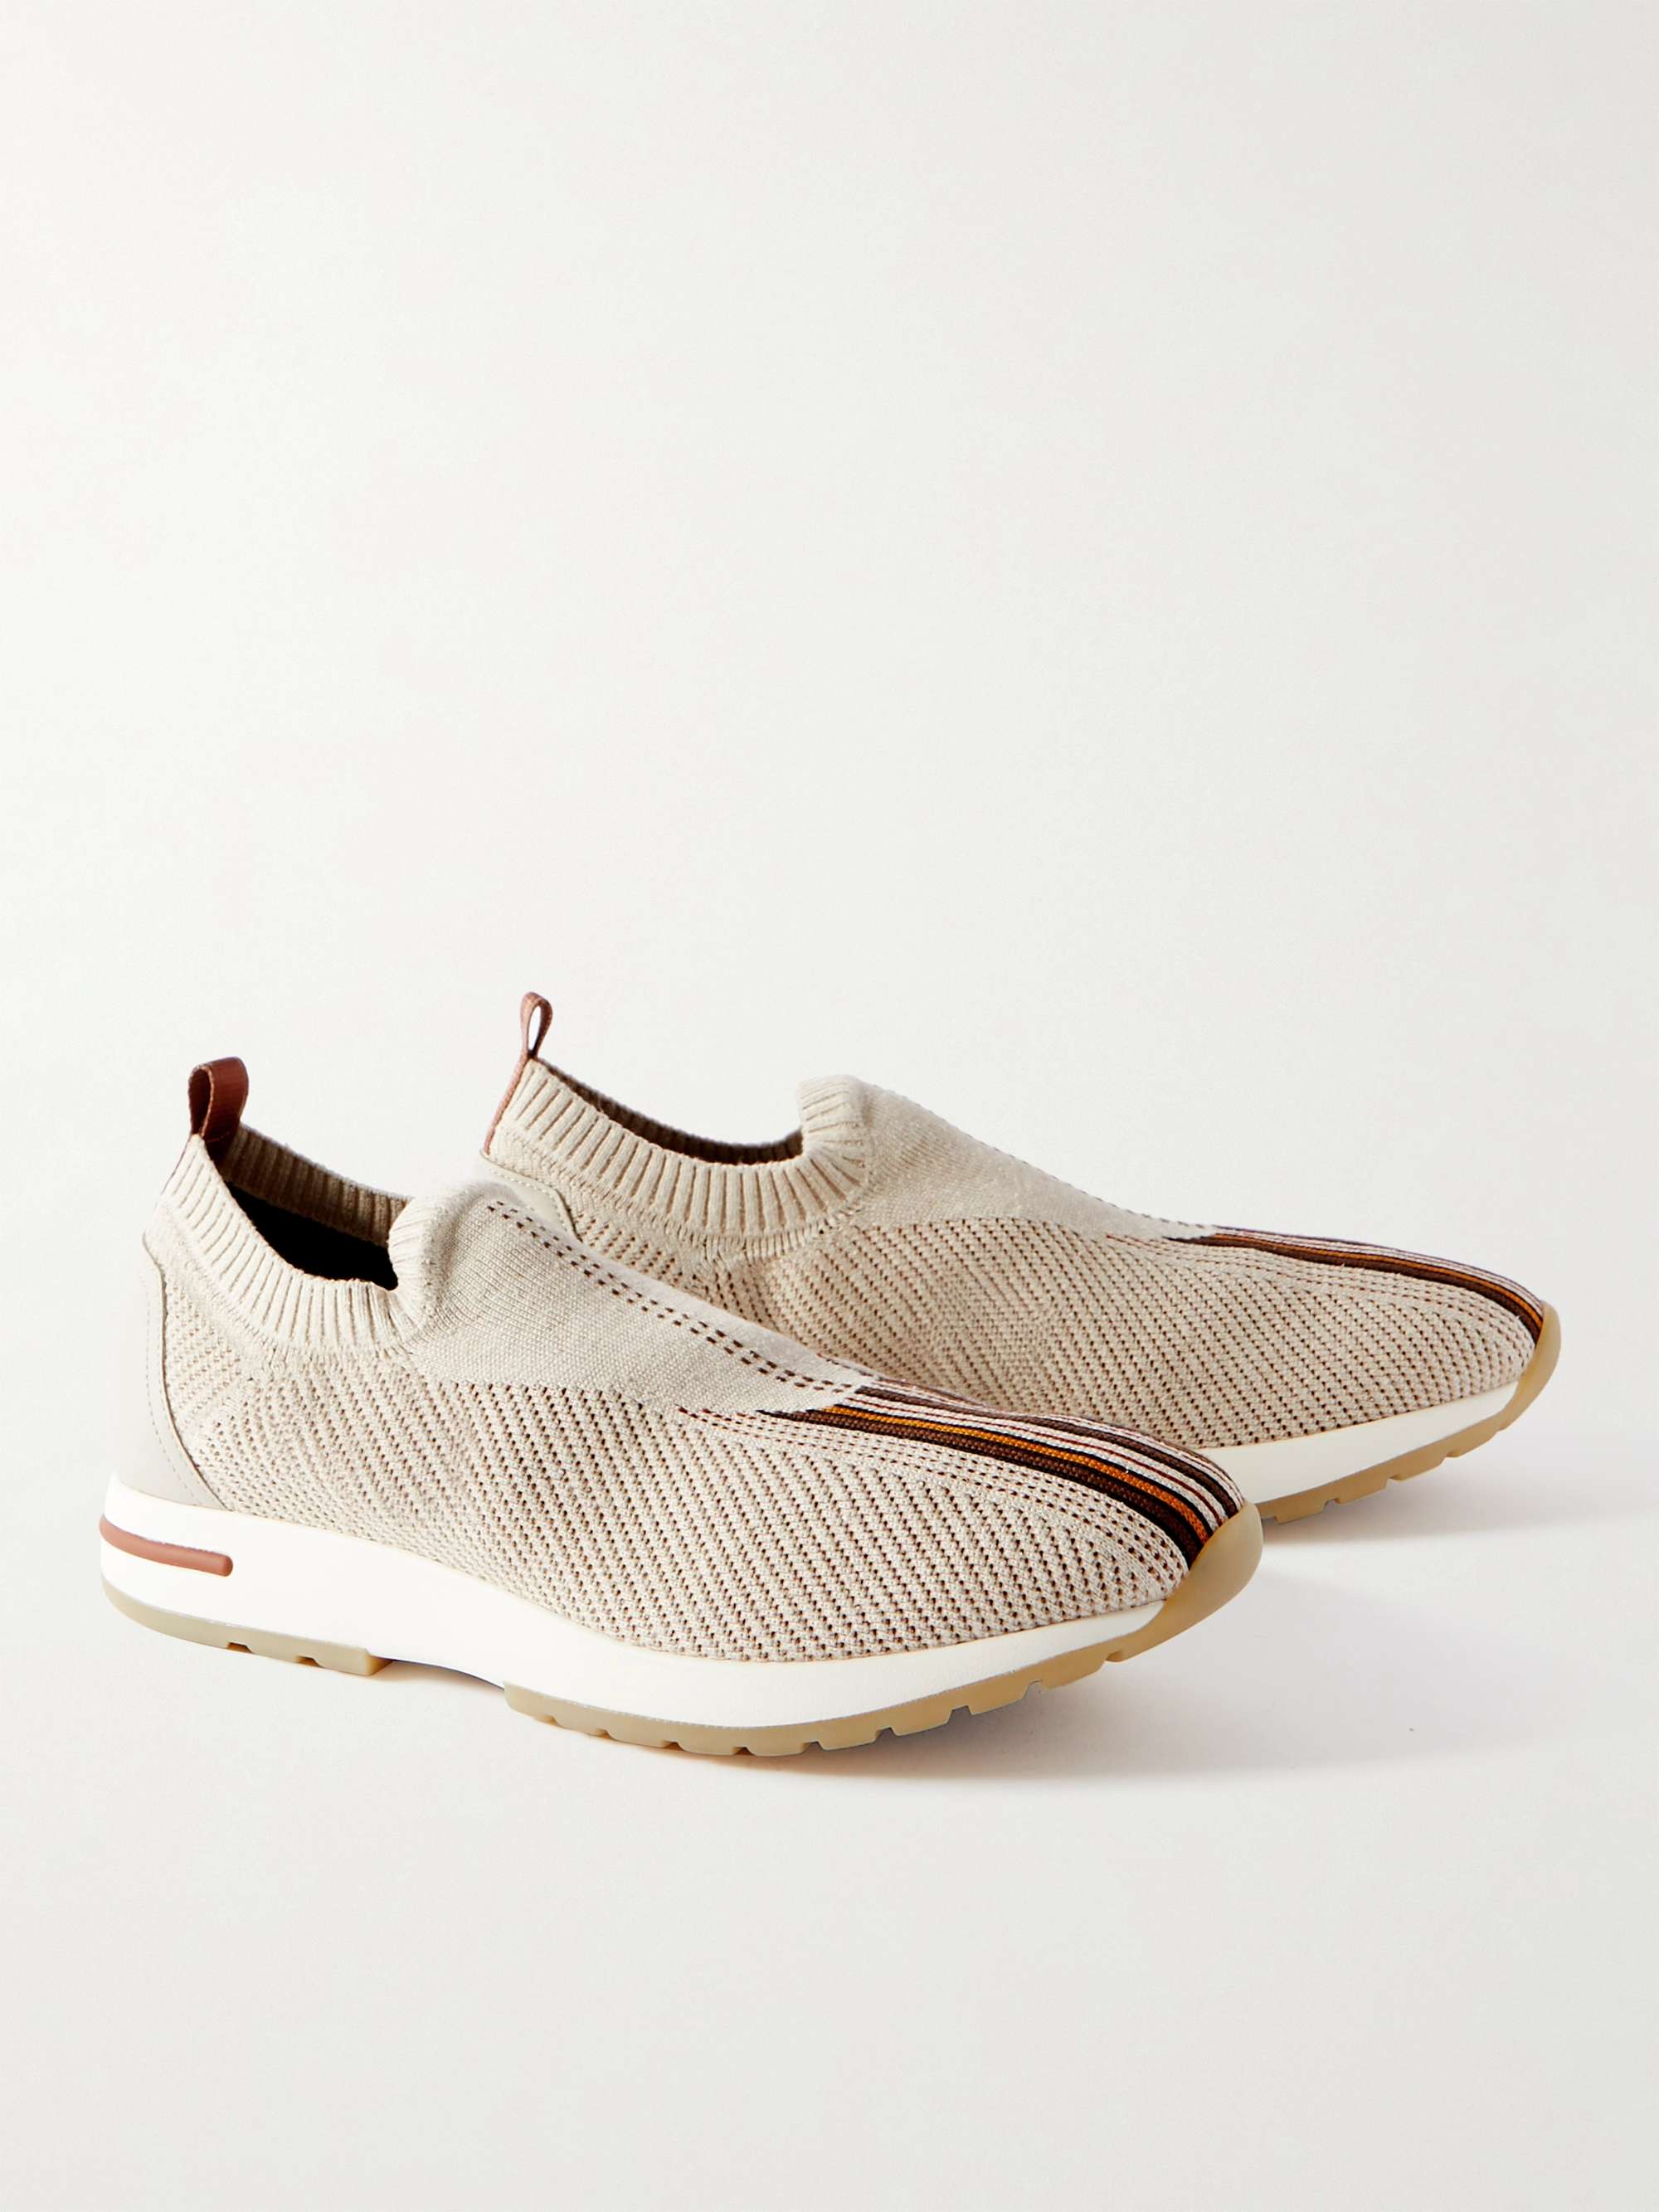 LORO PIANA 360 Lp Flexy Walk Leather-Trimmed Linen and Silk-Blend Slip-On Sneakers